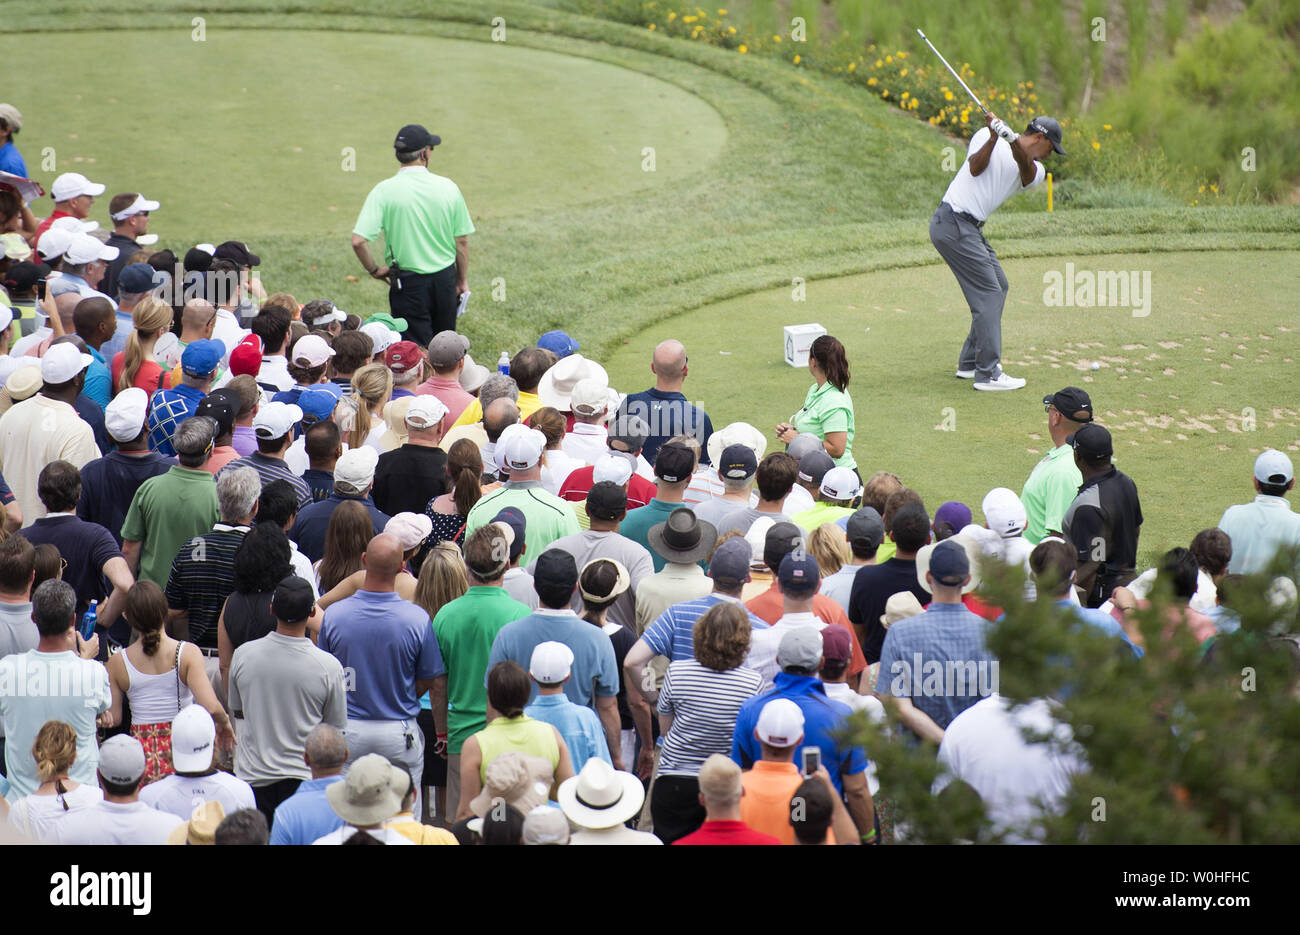 Tiger Woods hits off of the 10th tee during the second round of the Quicken Loans Nationals at Congressional Country Club, in Potomac, Maryland on June 27, 2014.  UPI/Kevin Dietsch Stock Photo